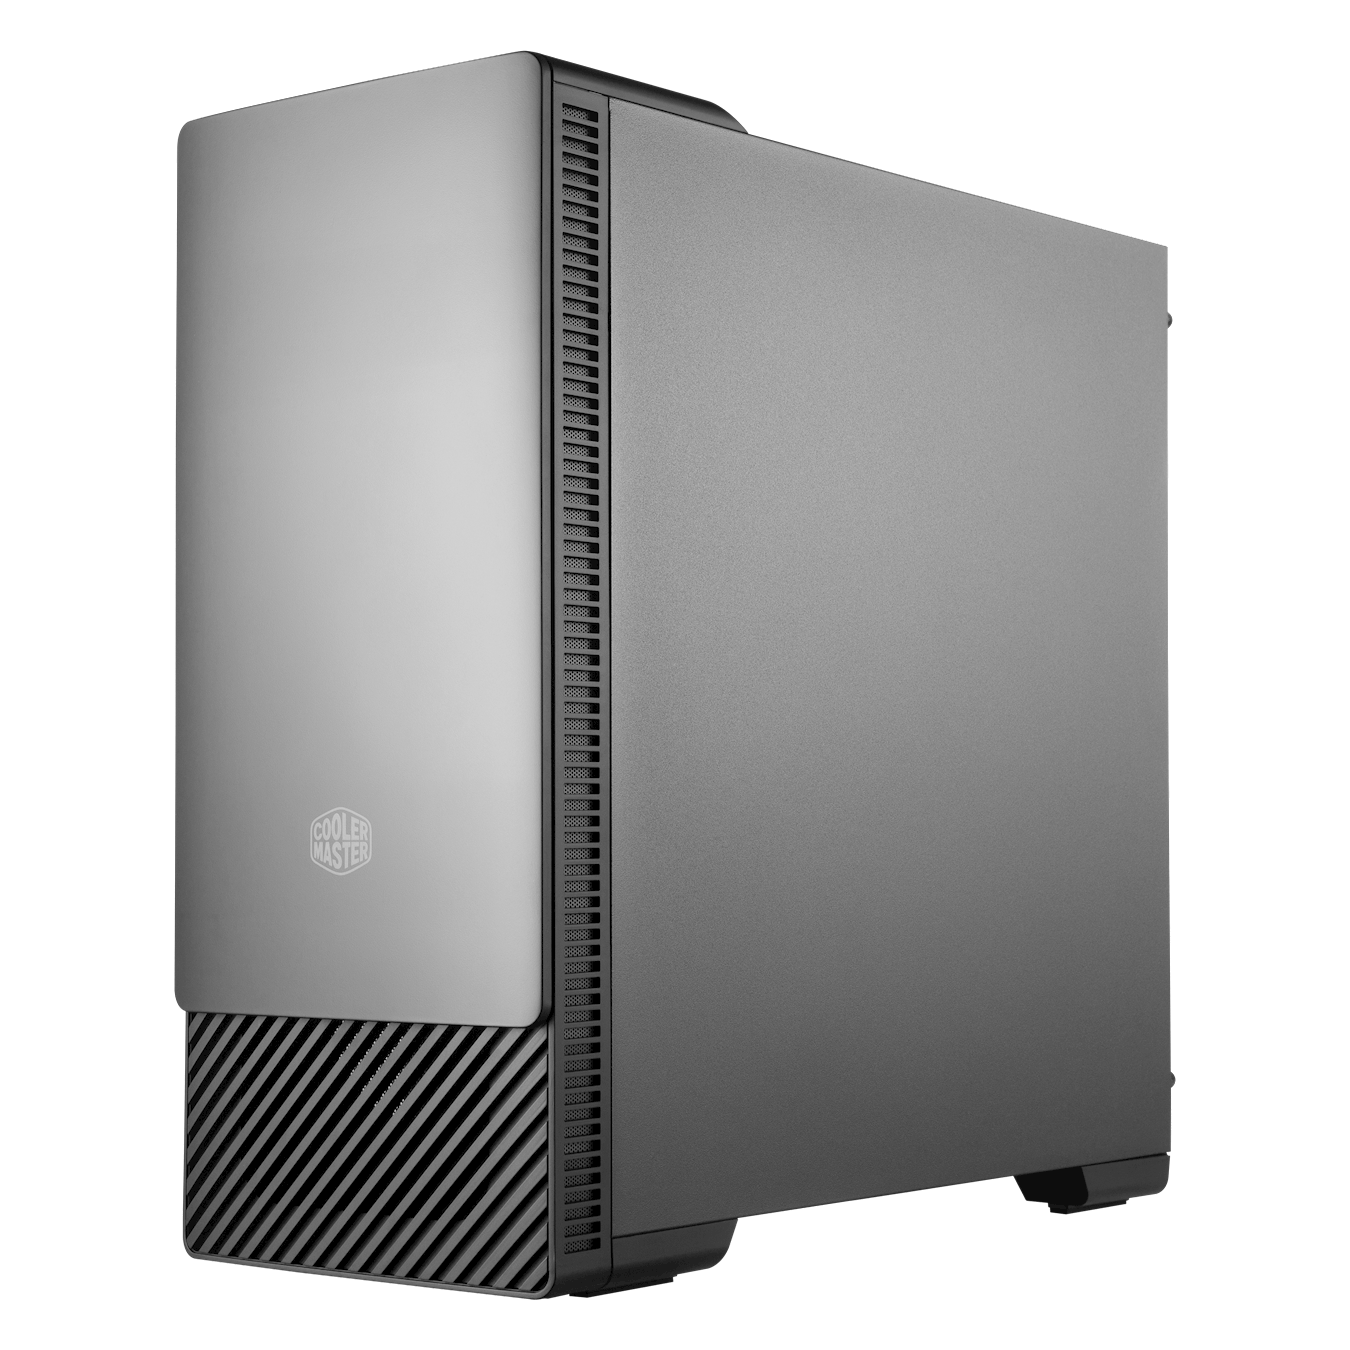 COOLER MASTER ELITE 500 WITHOUT ODD TEMPERED GLASS ATX CASING